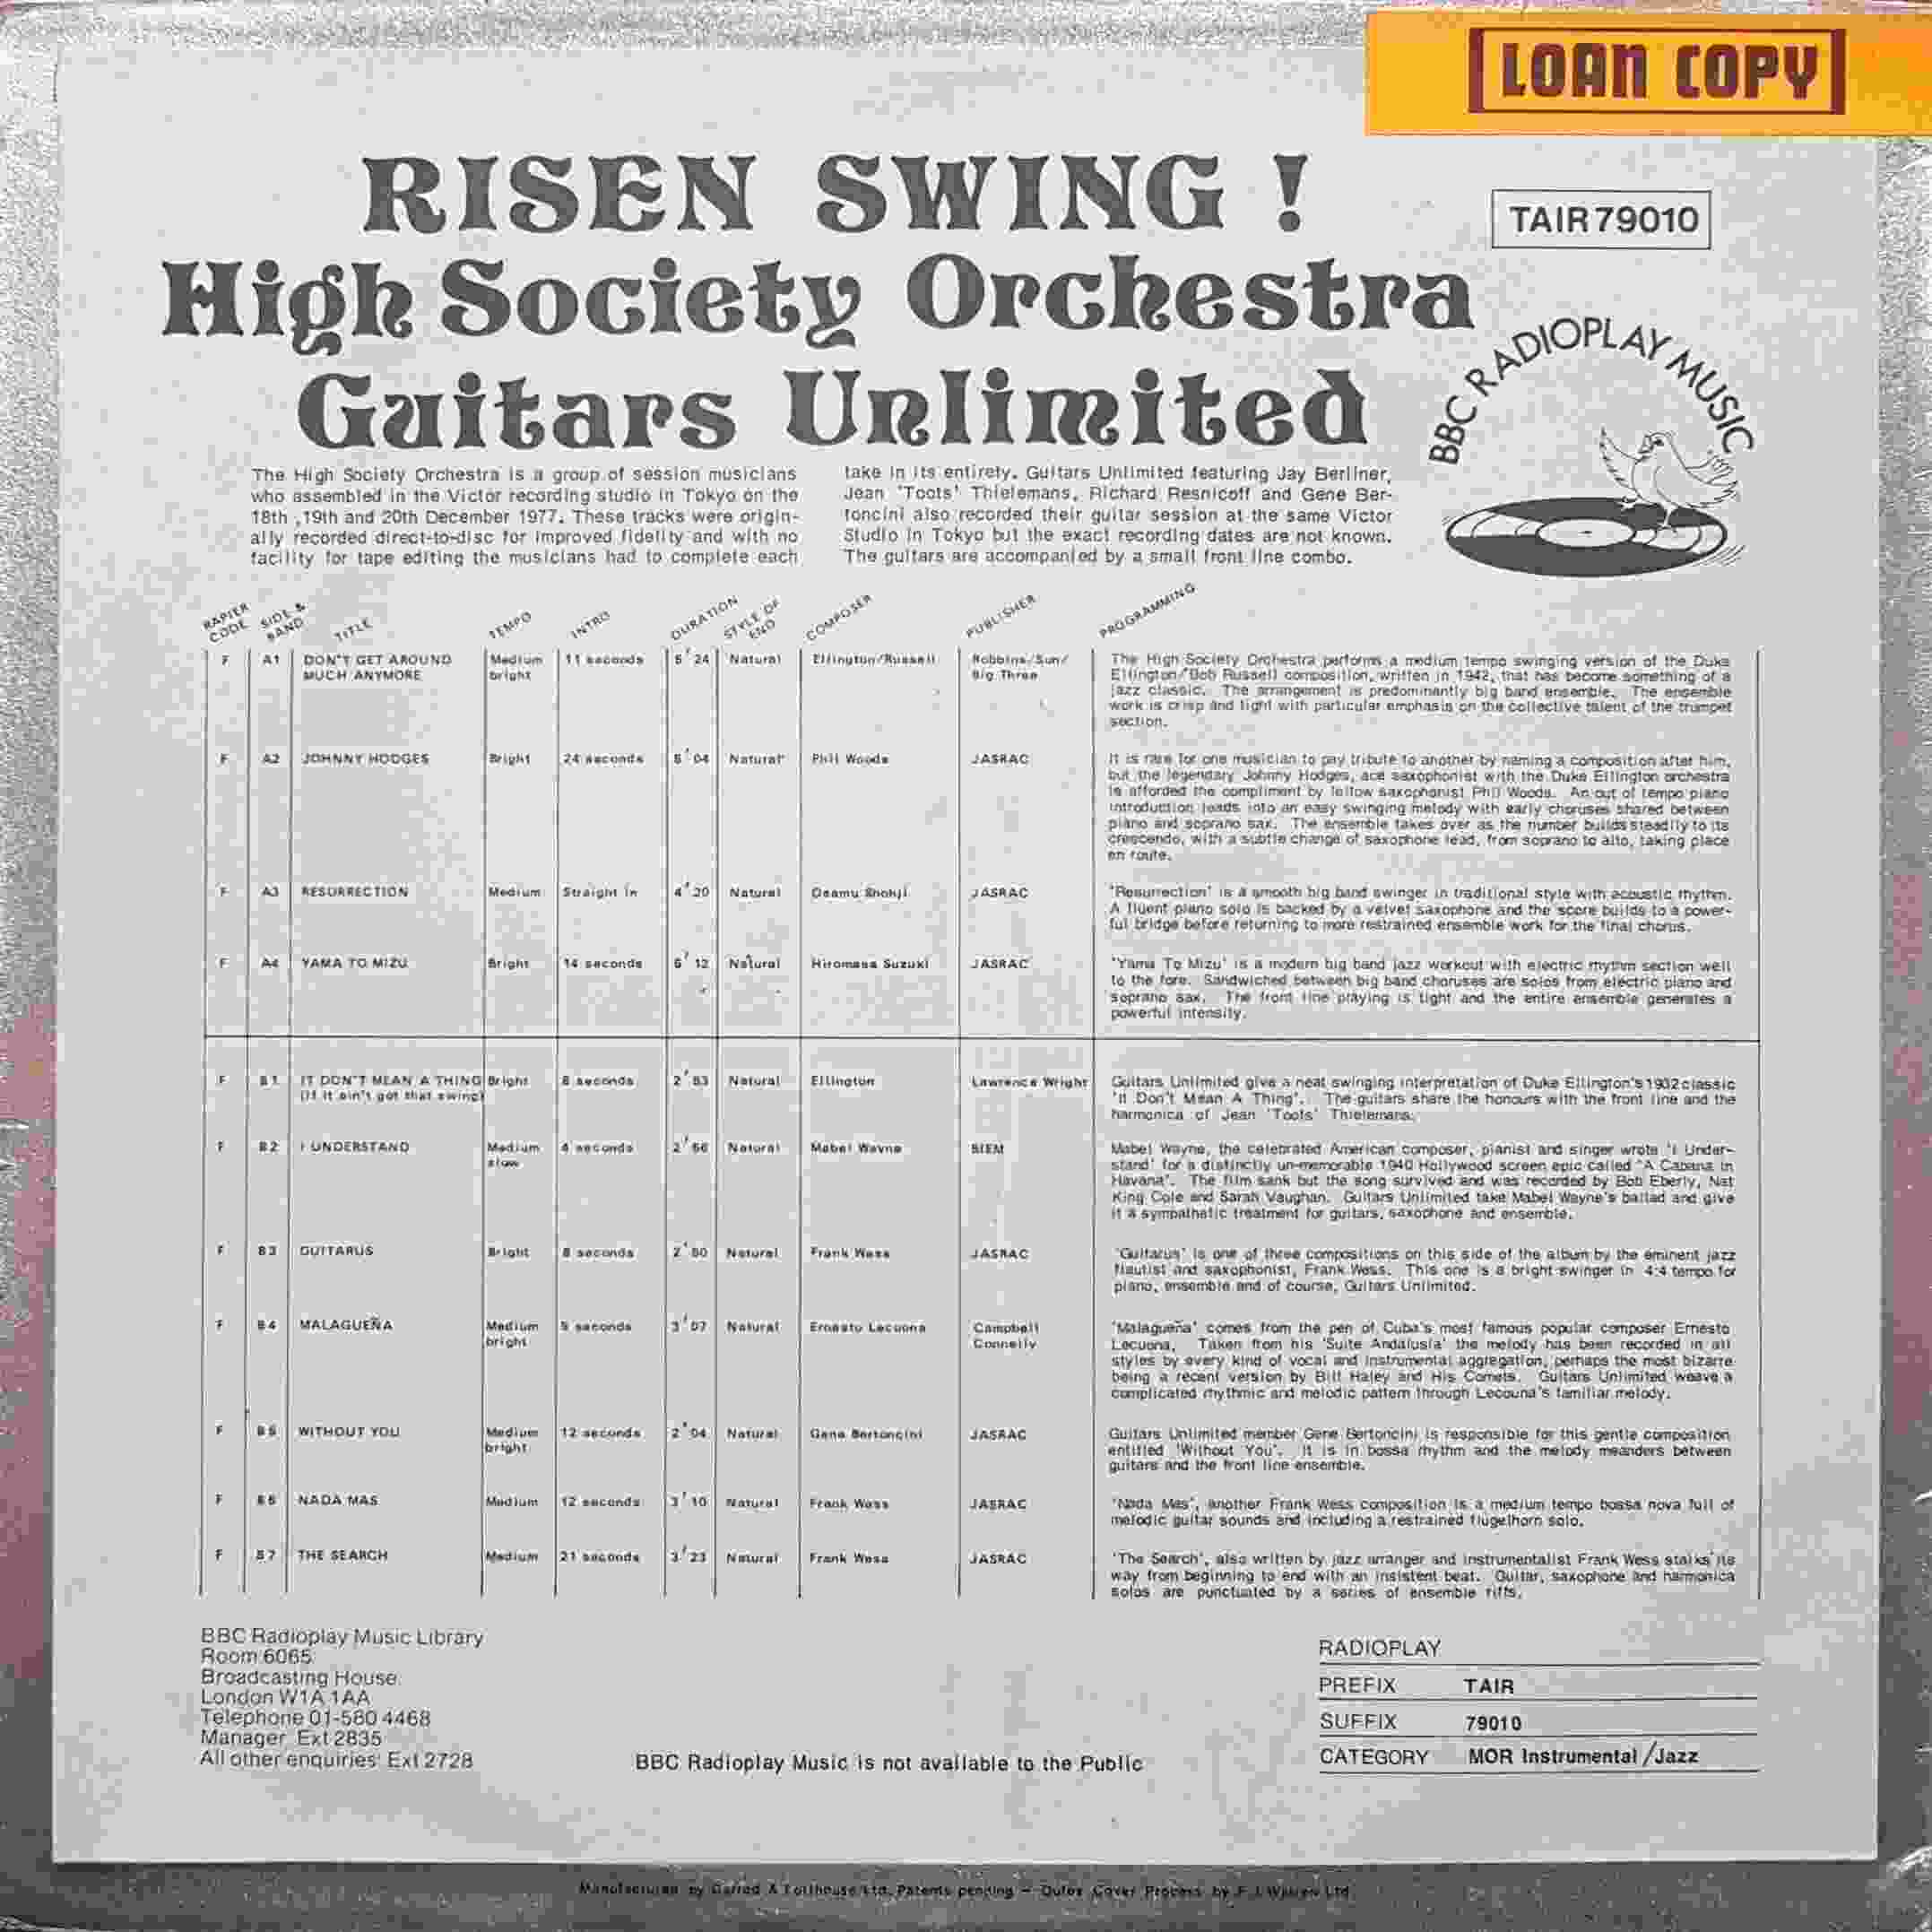 Picture of TAIR 79010 Risen swing! by artist High Society Orchestra Guitars Unlimited from the BBC records and Tapes library